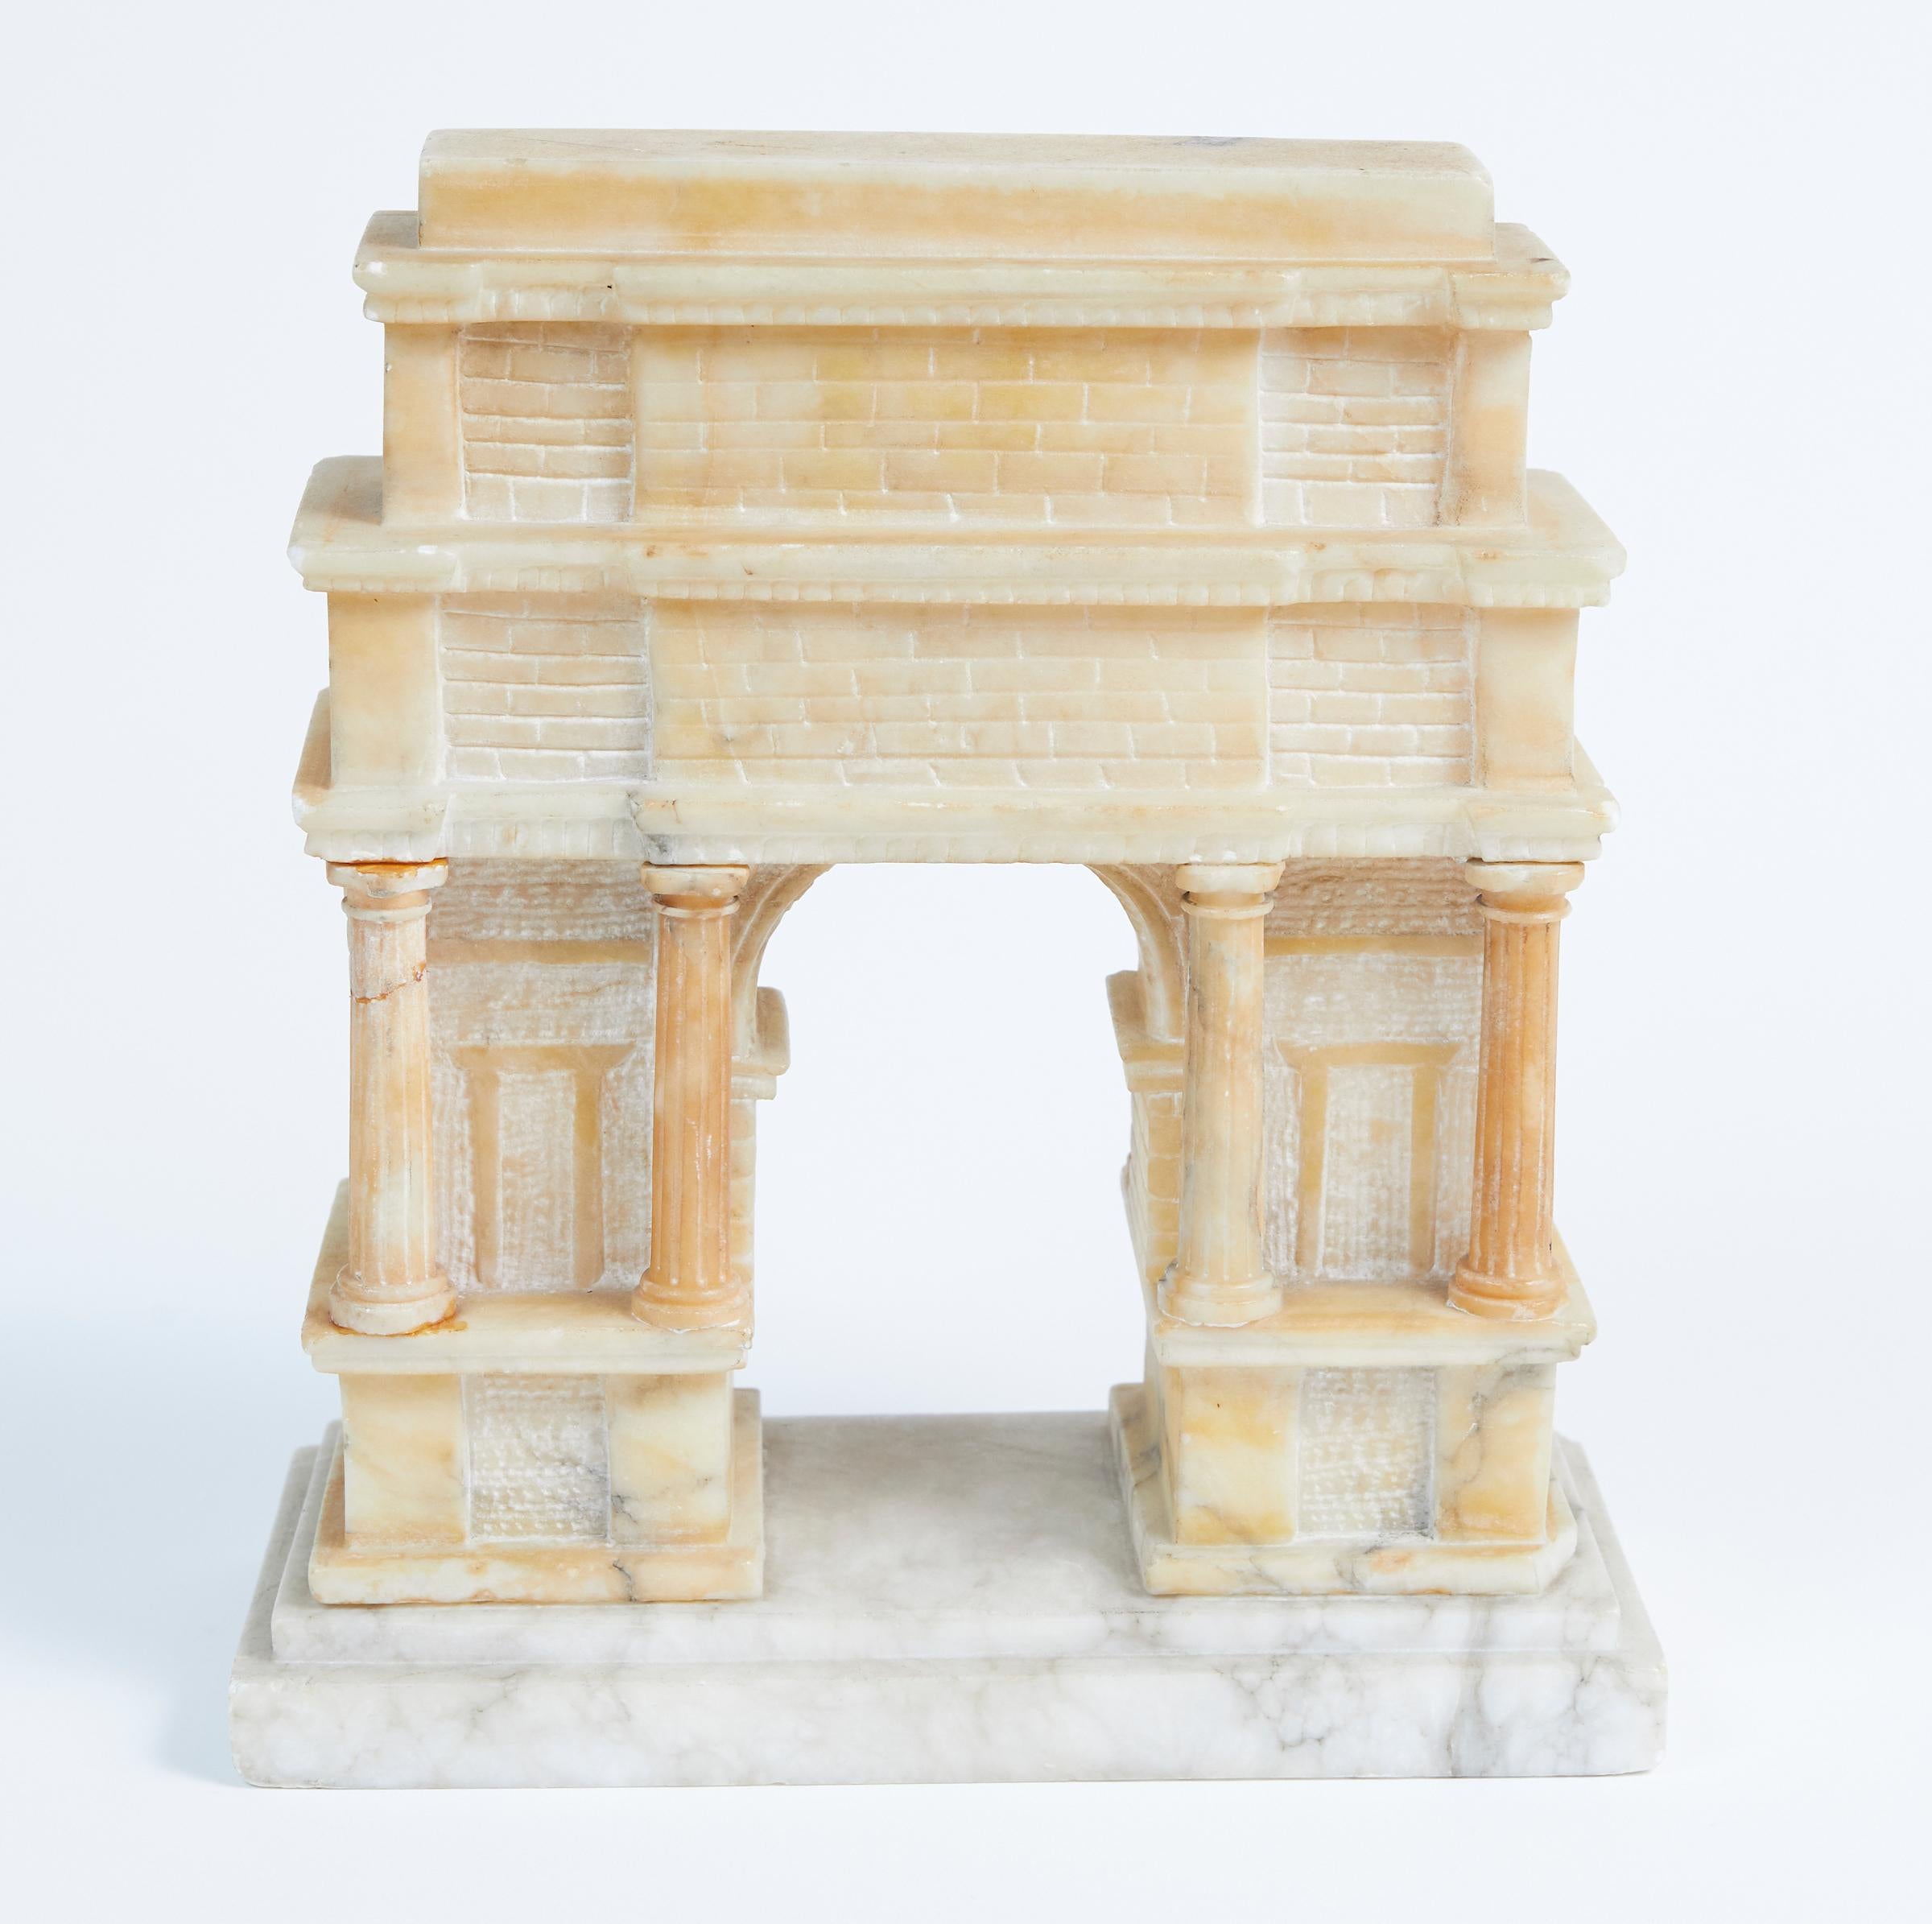 19th century carved alabaster Grand Tour model of Titus arch in Rome.